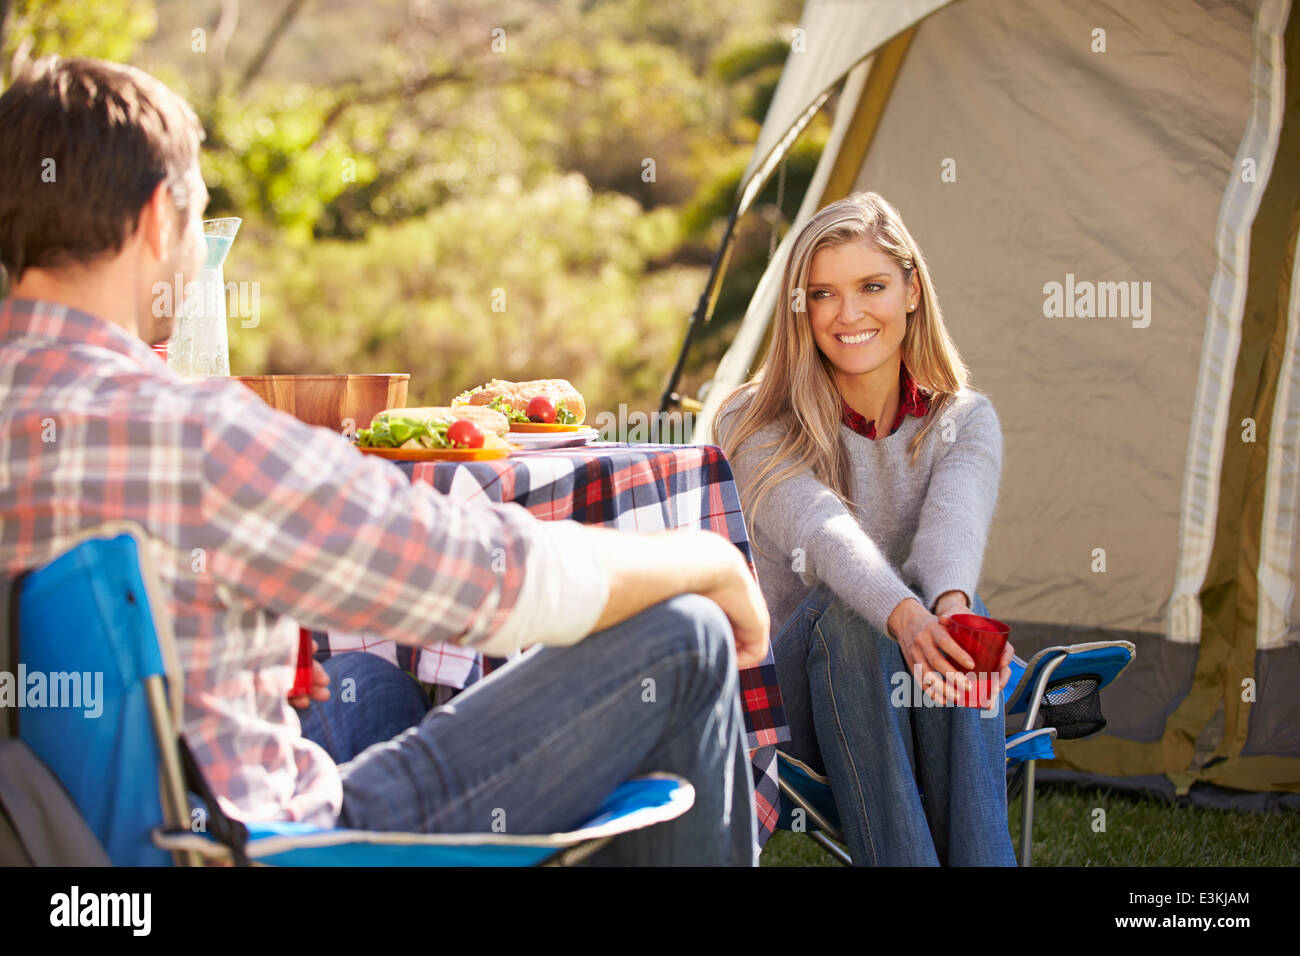 Couple Enjoying Camping Holiday In Countryside Stock Photo